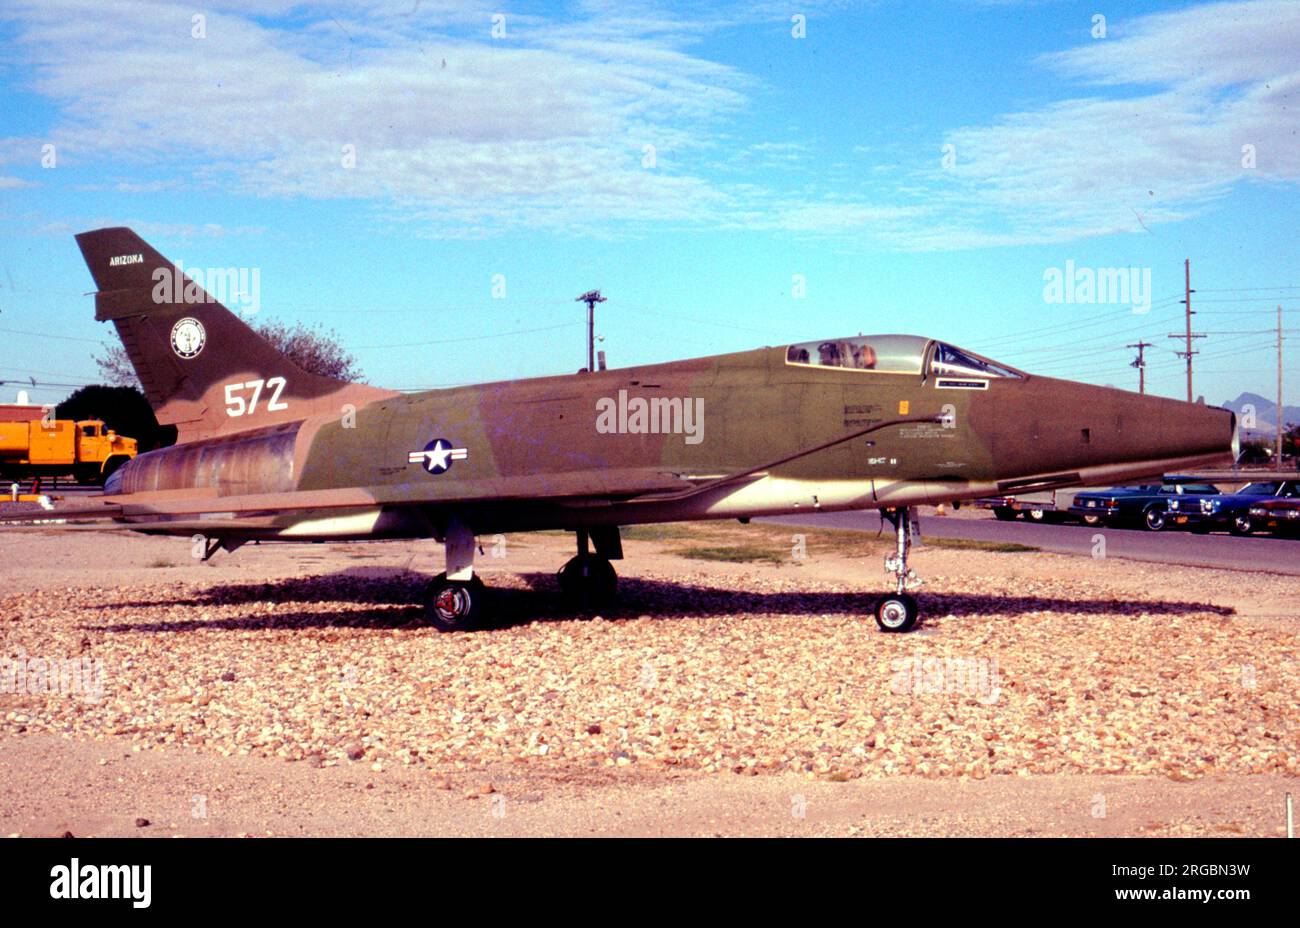 North American F-100D Super Sabre 56-3055 (msn 235-153), marked as '572' in front of the Arizona Air National Guard HQ. Stock Photo